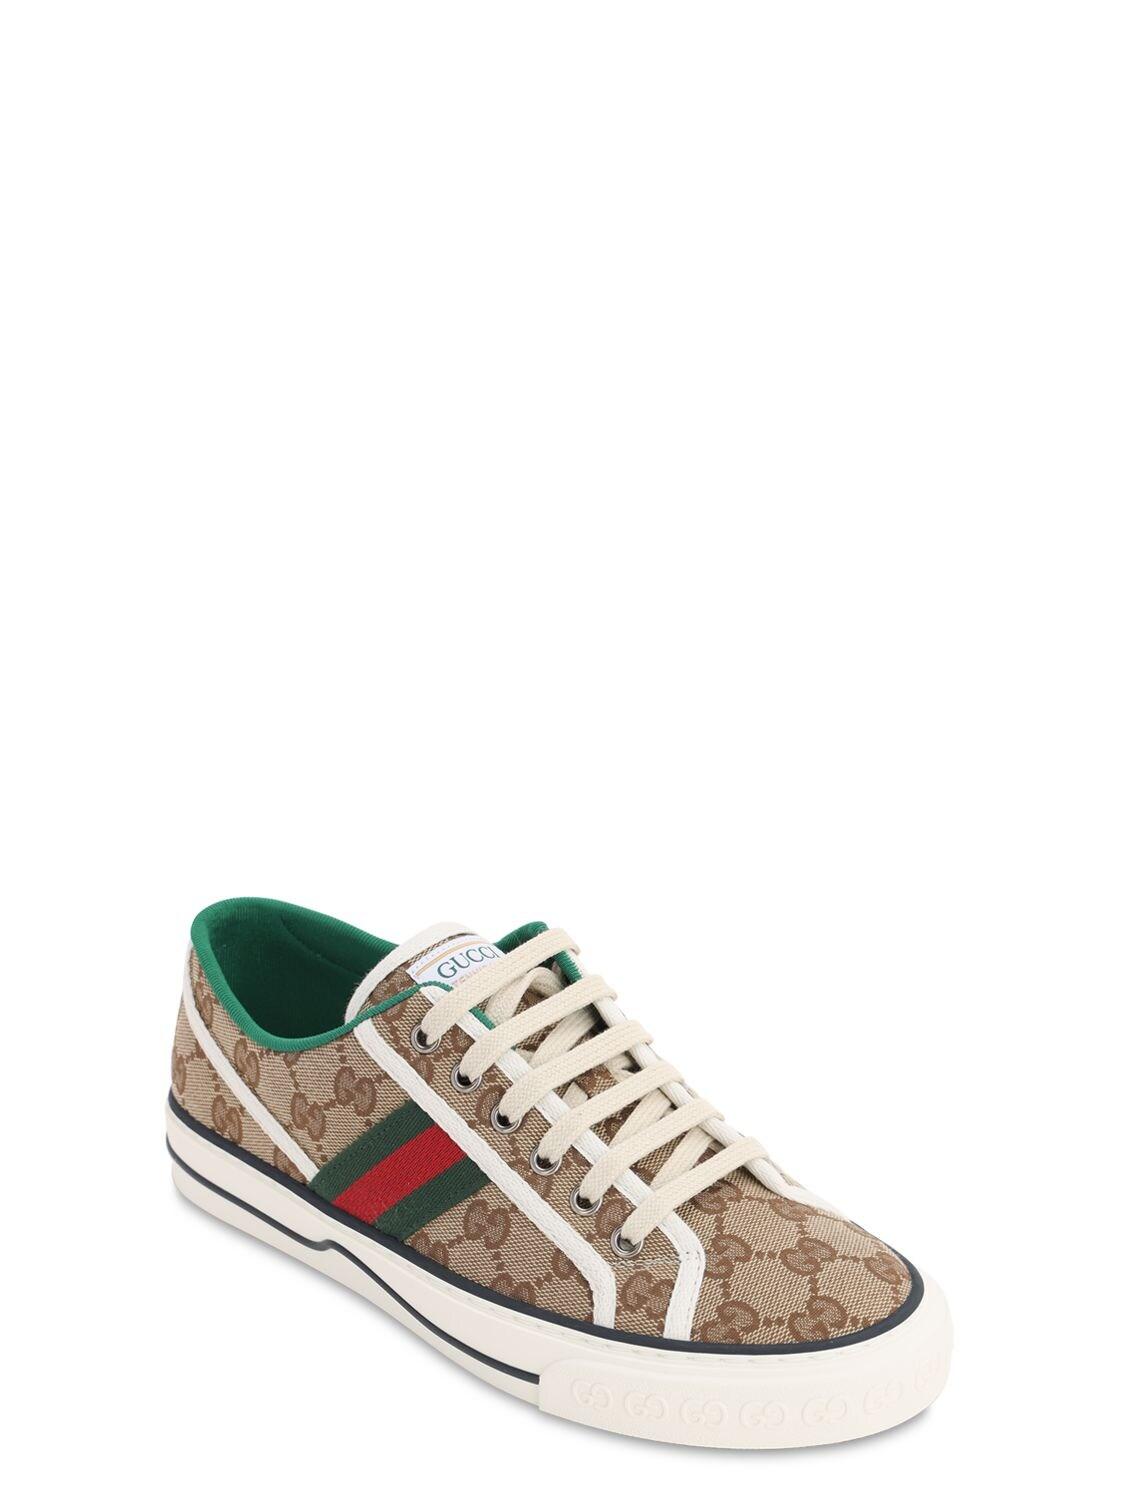 Gucci Gg Canvas Sneakers W/web Detail in Beige (Natural) for Men - Lyst